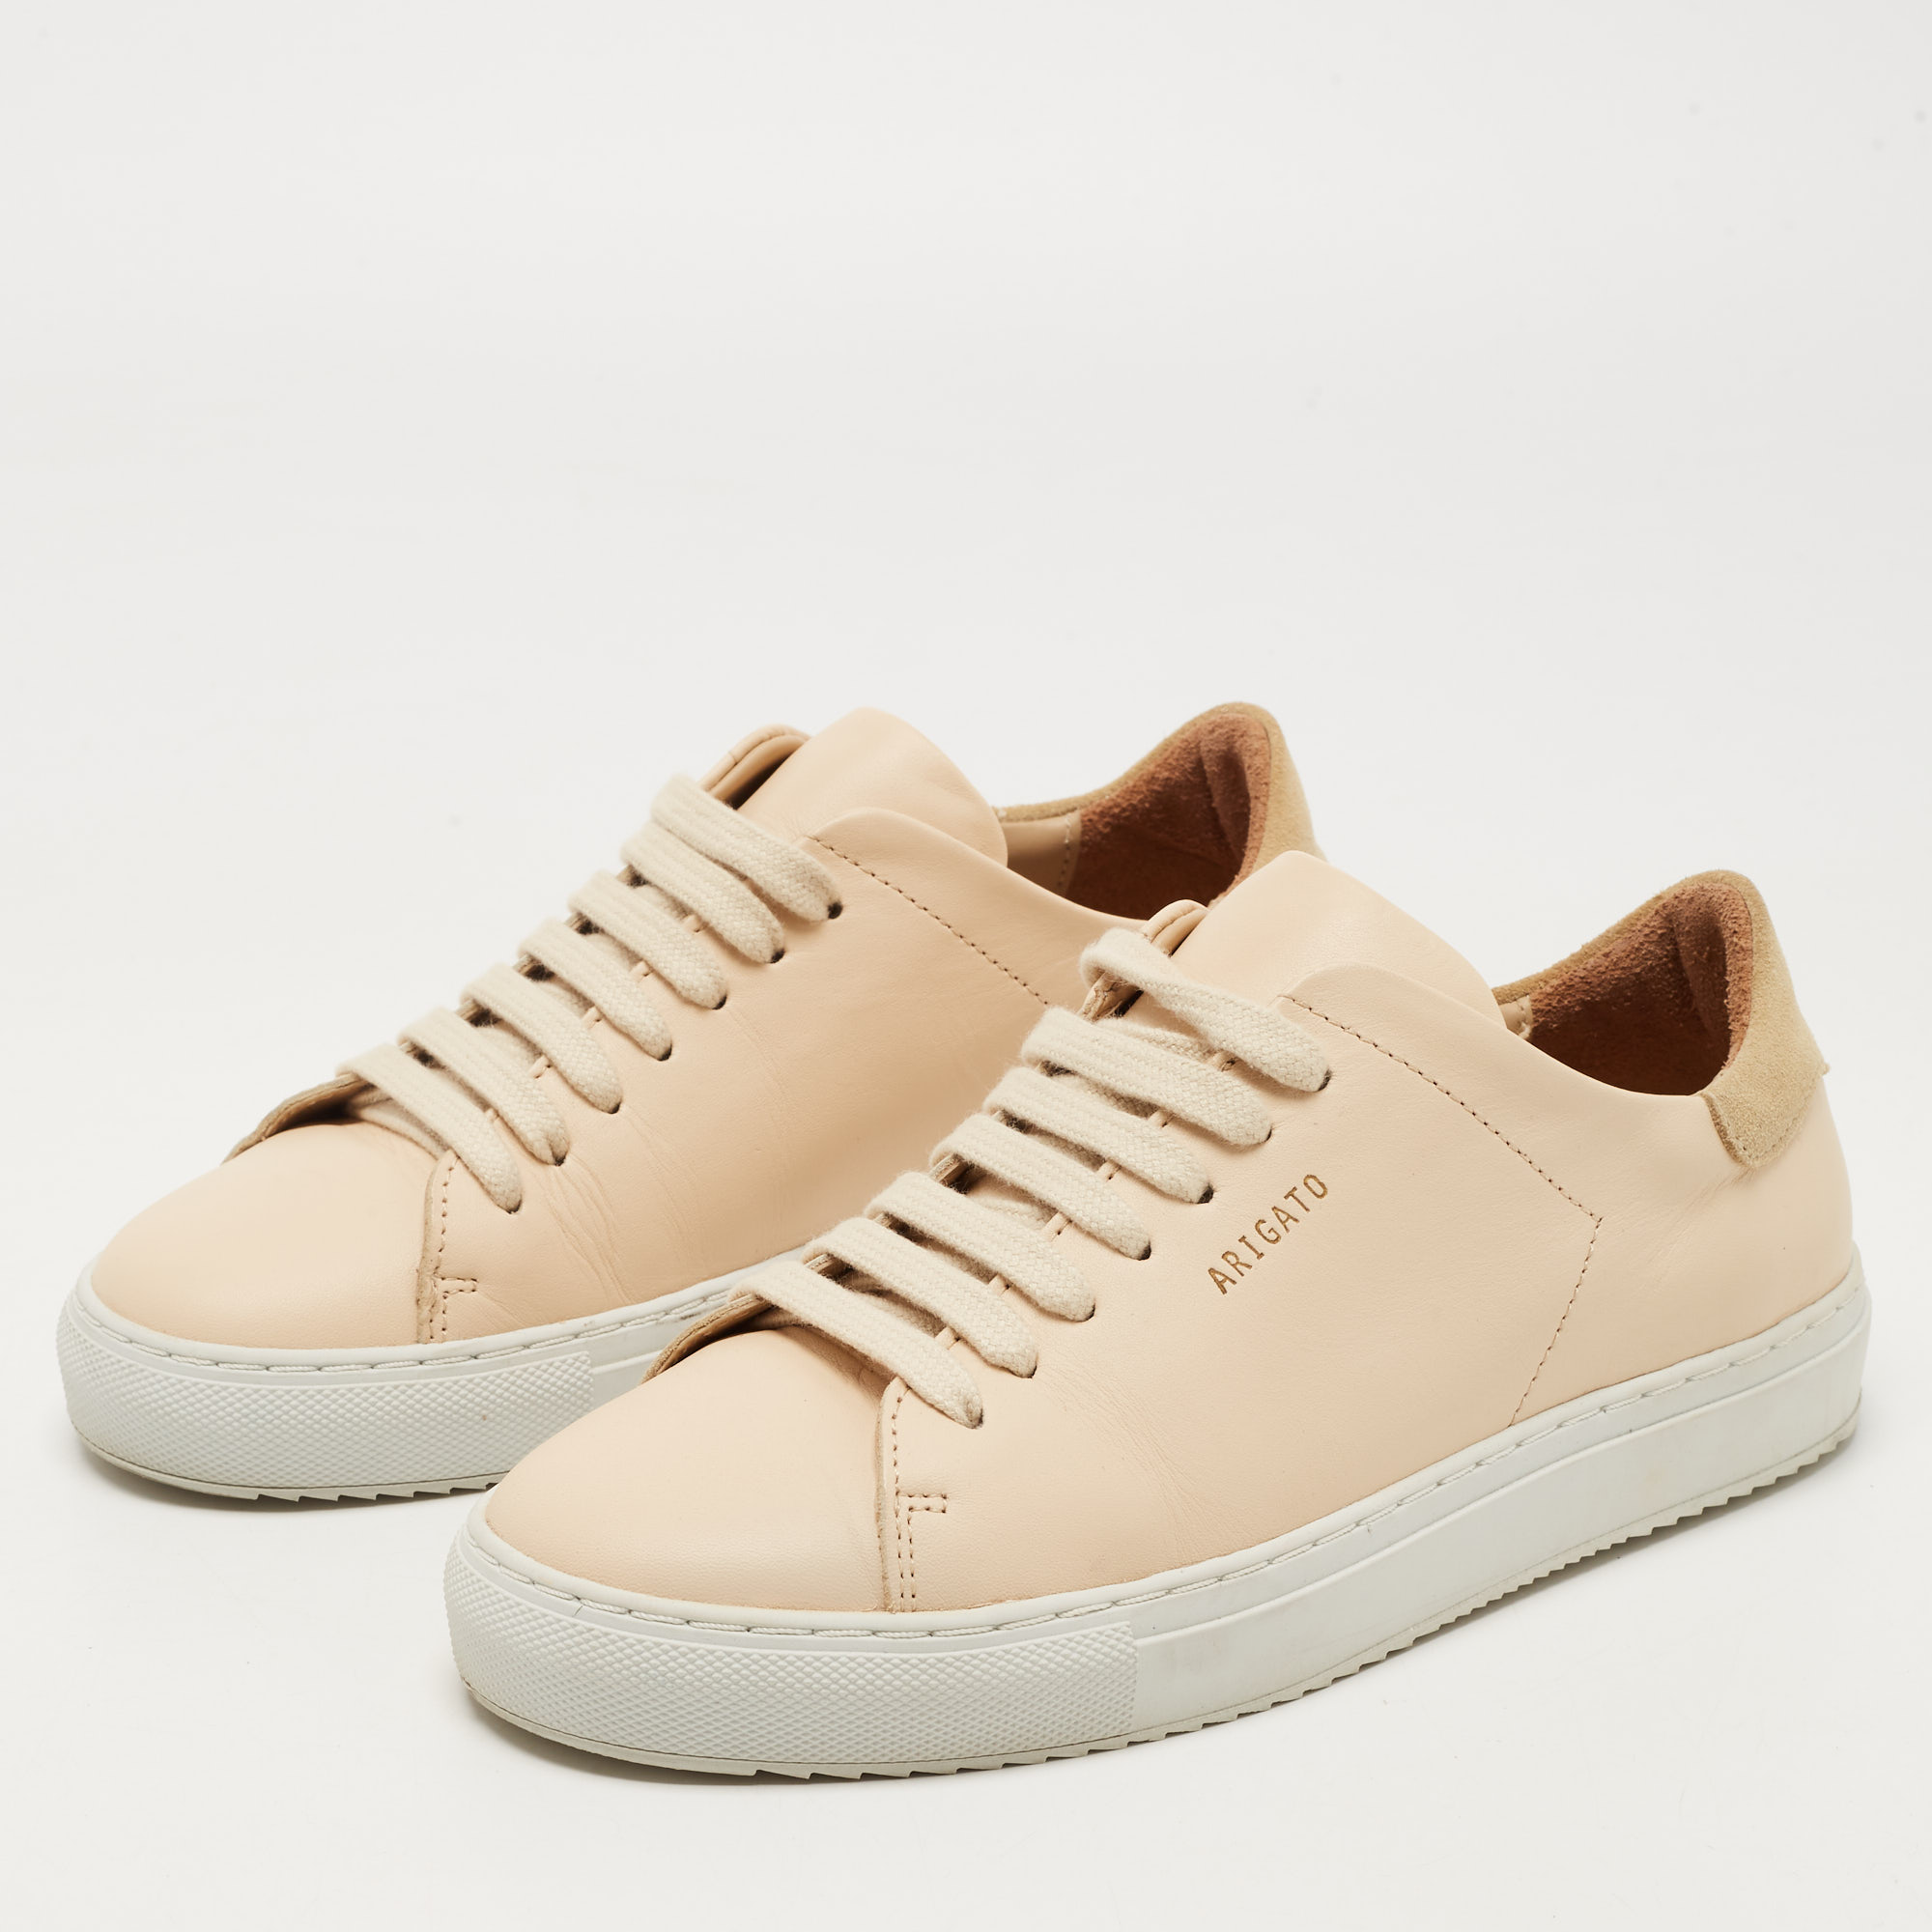 

Axel Arigato Beige Leather and Suede Low Top Sneakers Size